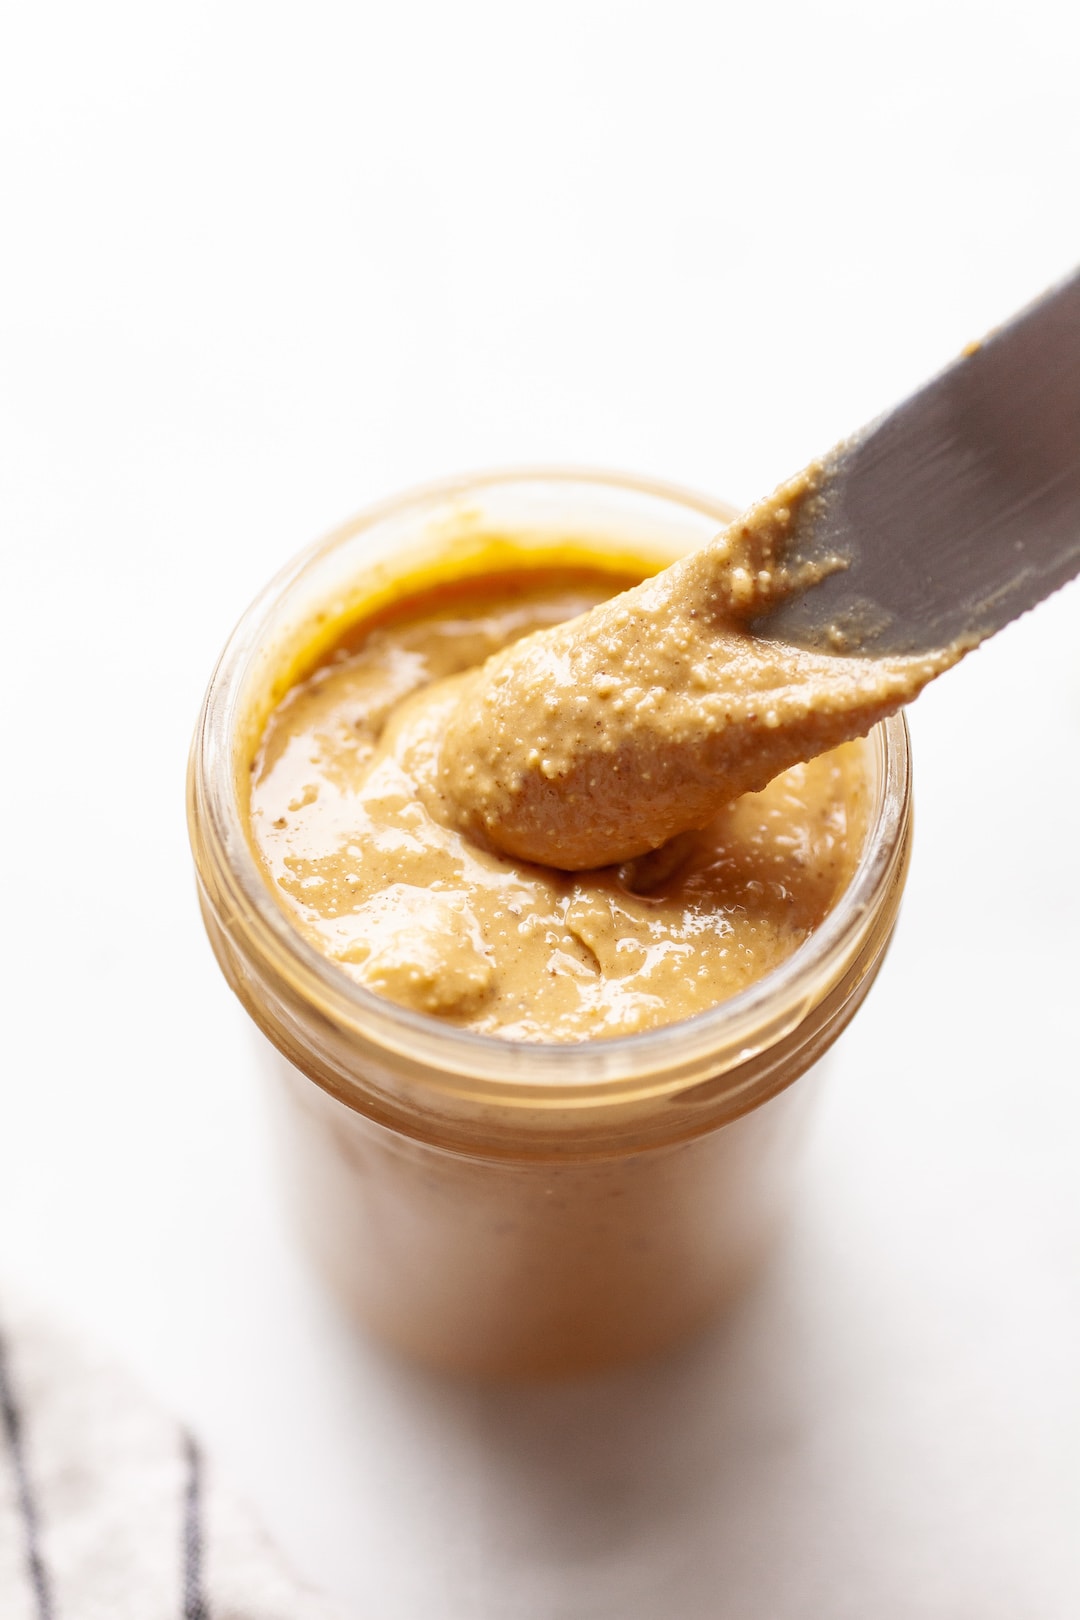 Jar of coconut peanut butter with a knife